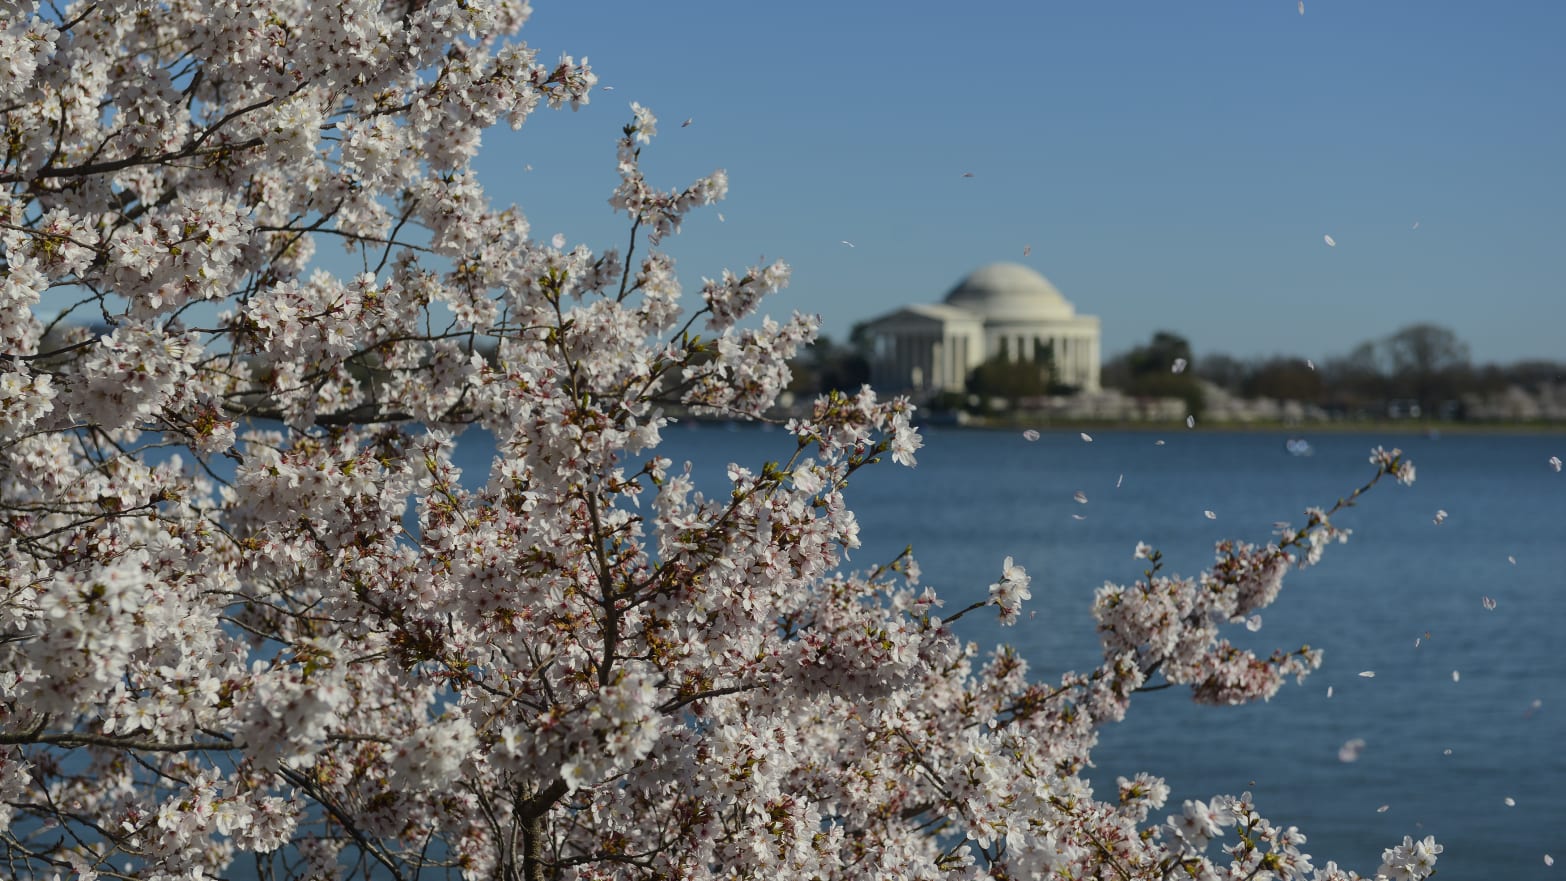 The Jefferson Memorial is seen through cherry blossoms in bloom on the tidal basin on March 29, 2017 in Washington, DC. 